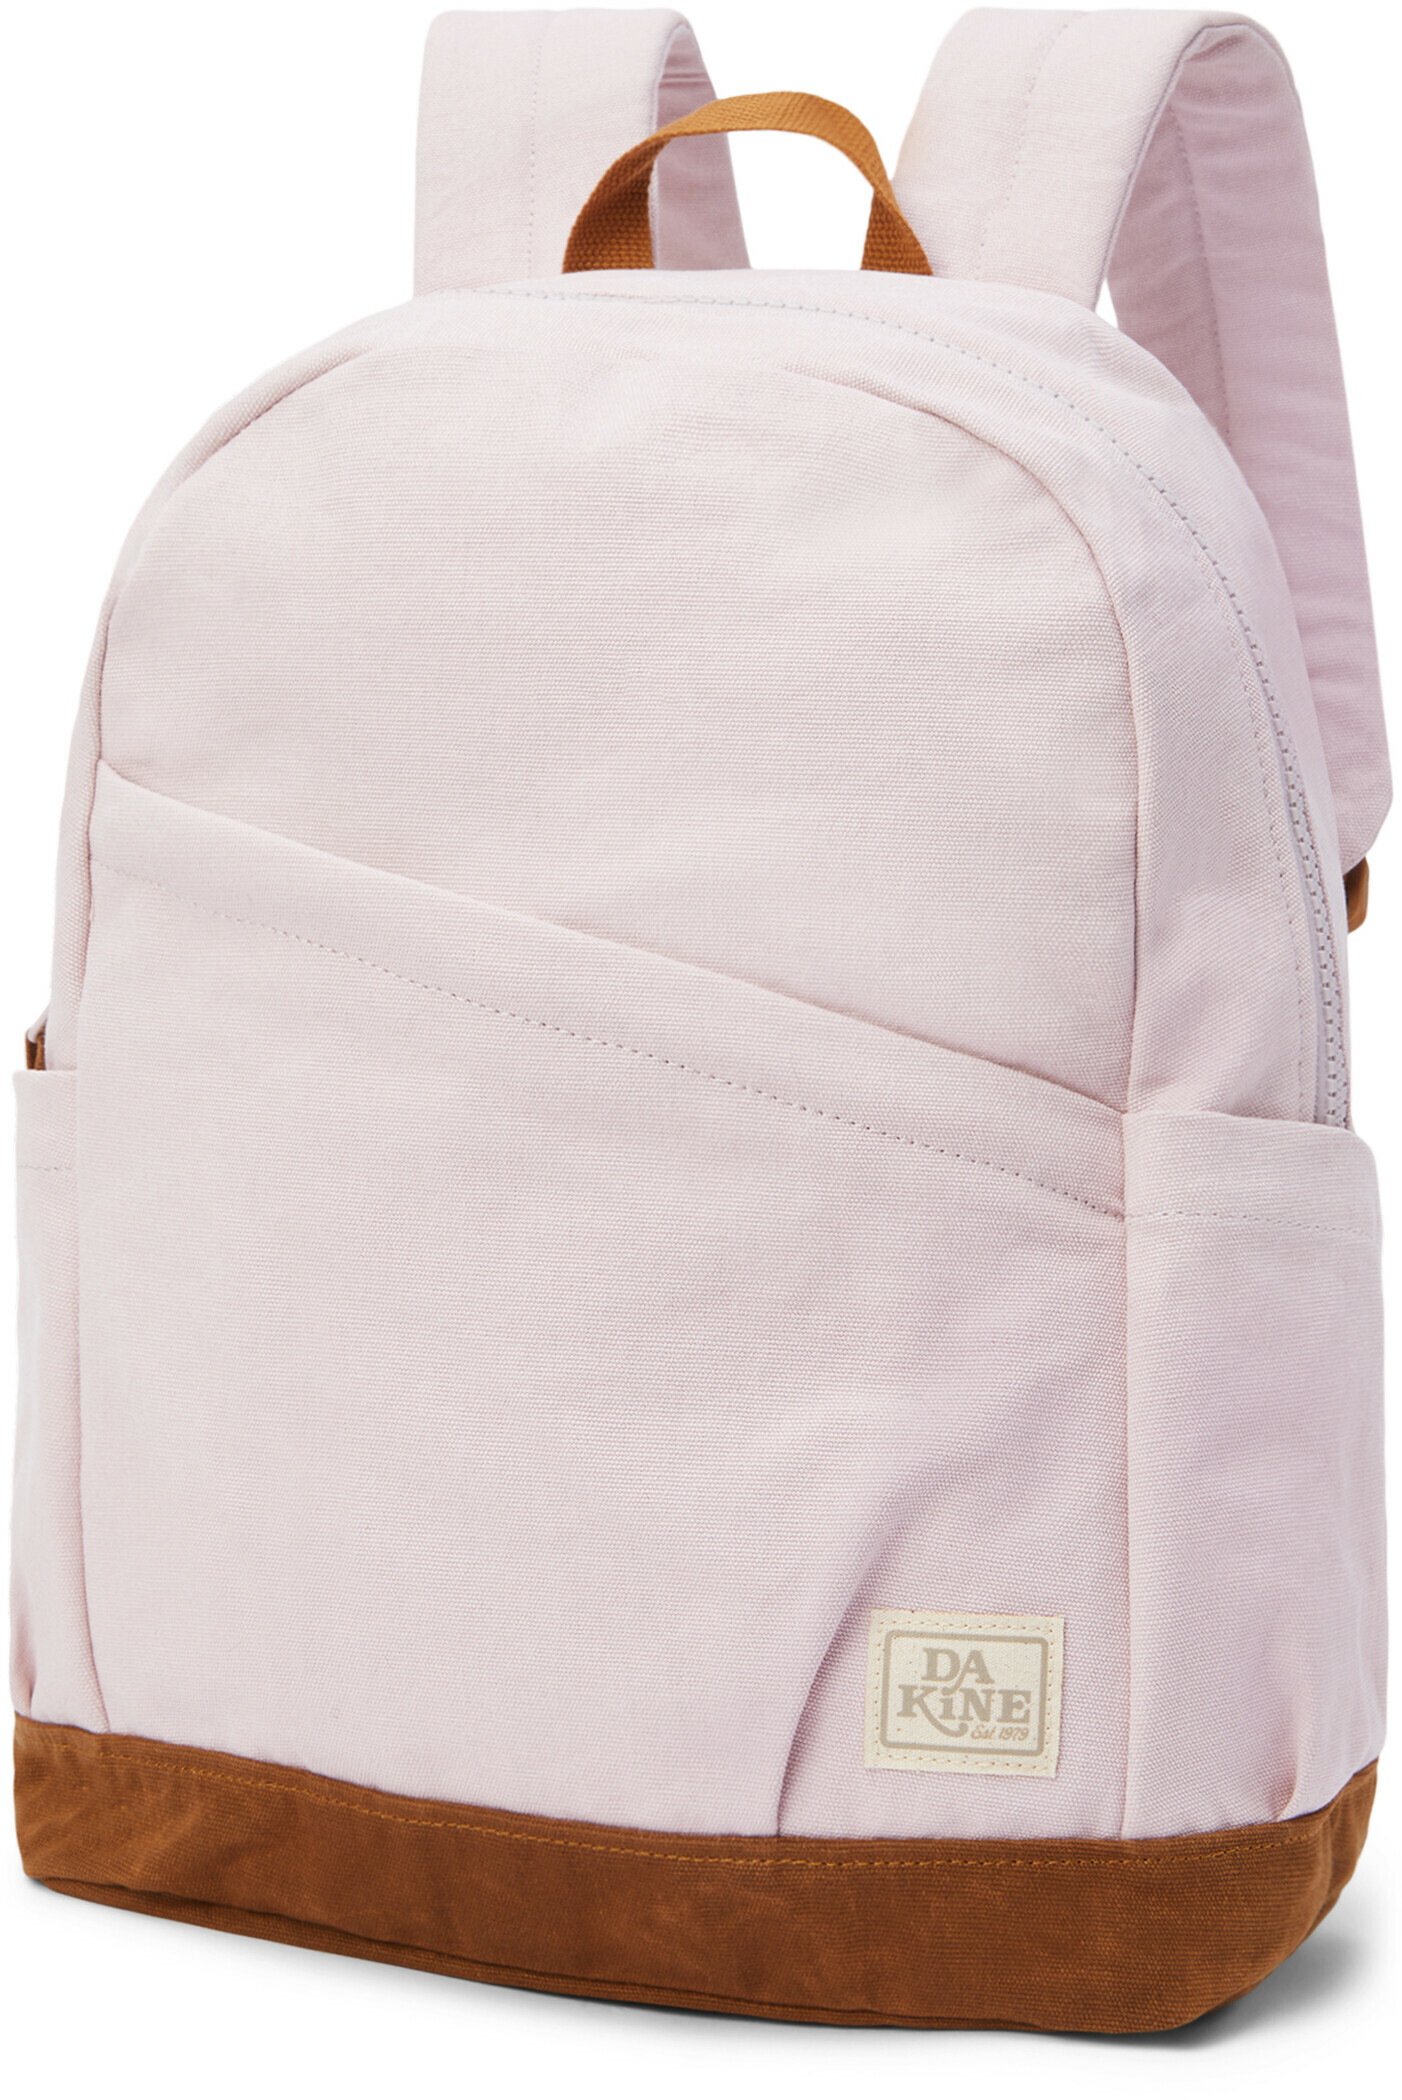 WEDNESDAY BACKPACK 21L